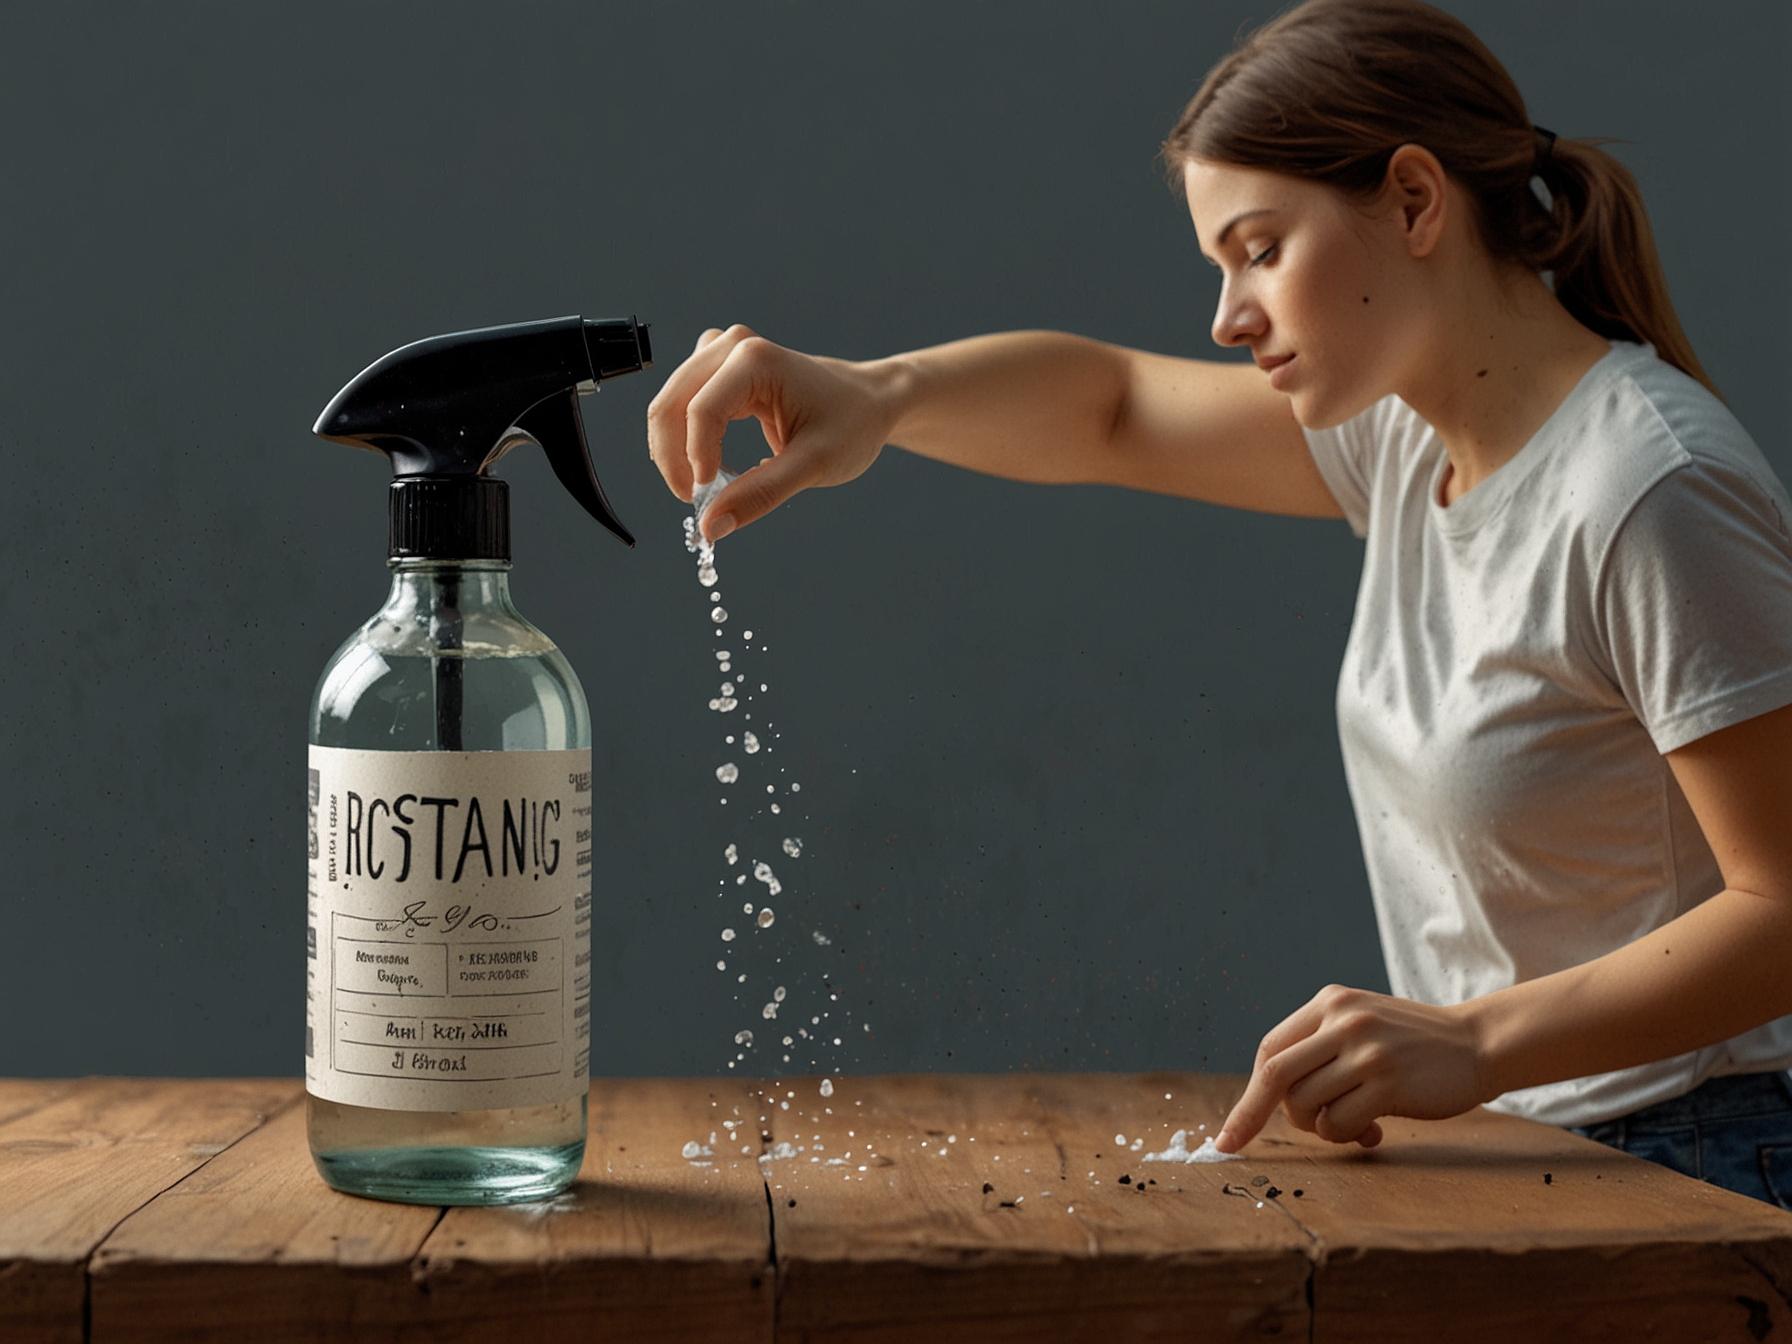 A person mixing water, white vinegar, and essential oils to create a homemade ant-repellent spray in a clean spray bottle, emphasizing the simplicity and natural ingredients.